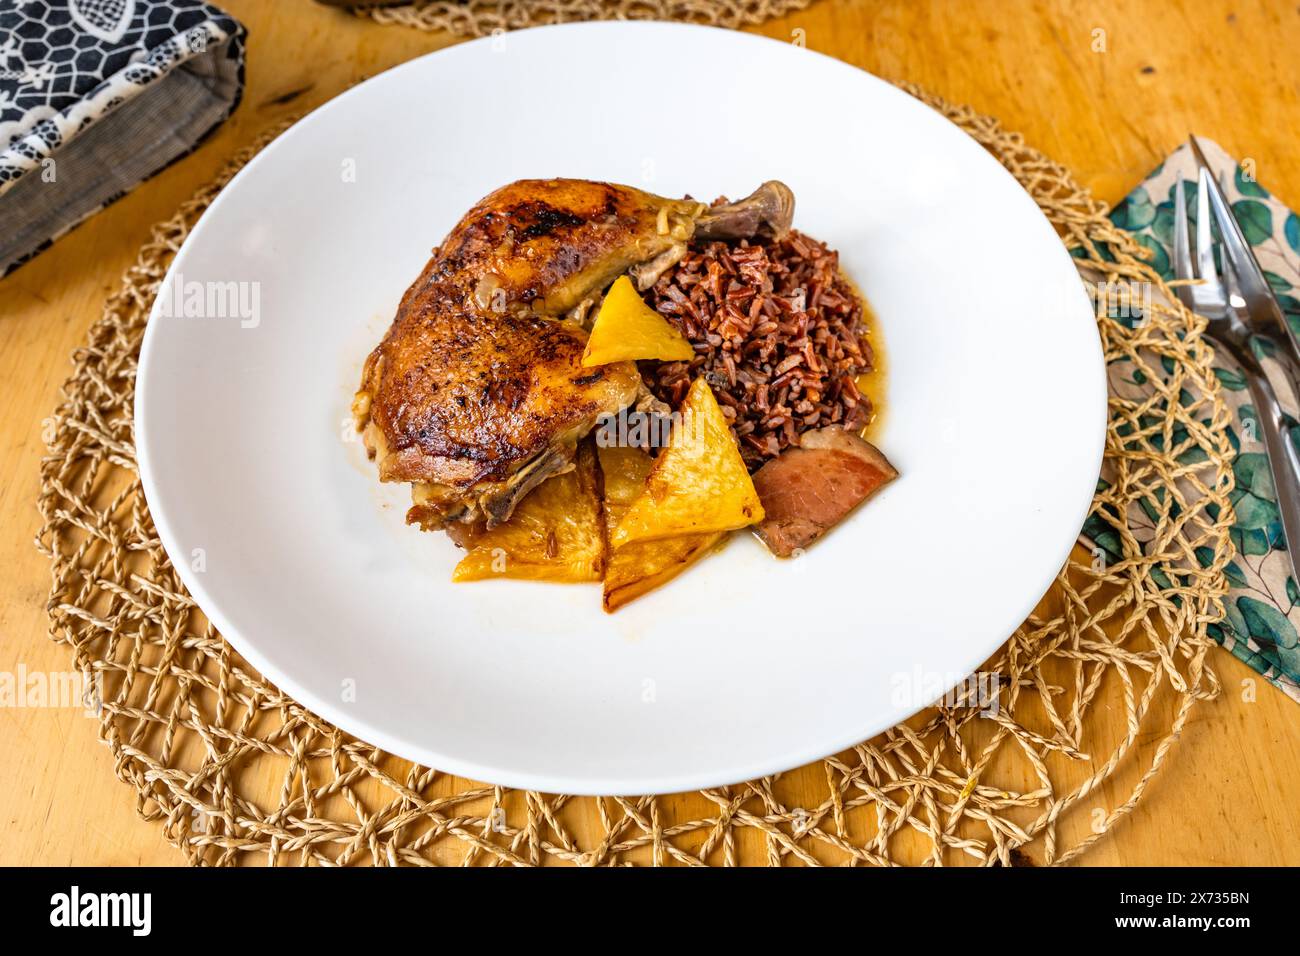 Baked chicken leg with red rice, pineapple piece and bacon in white plate on wooden table, serving size, closeup. Stock Photo